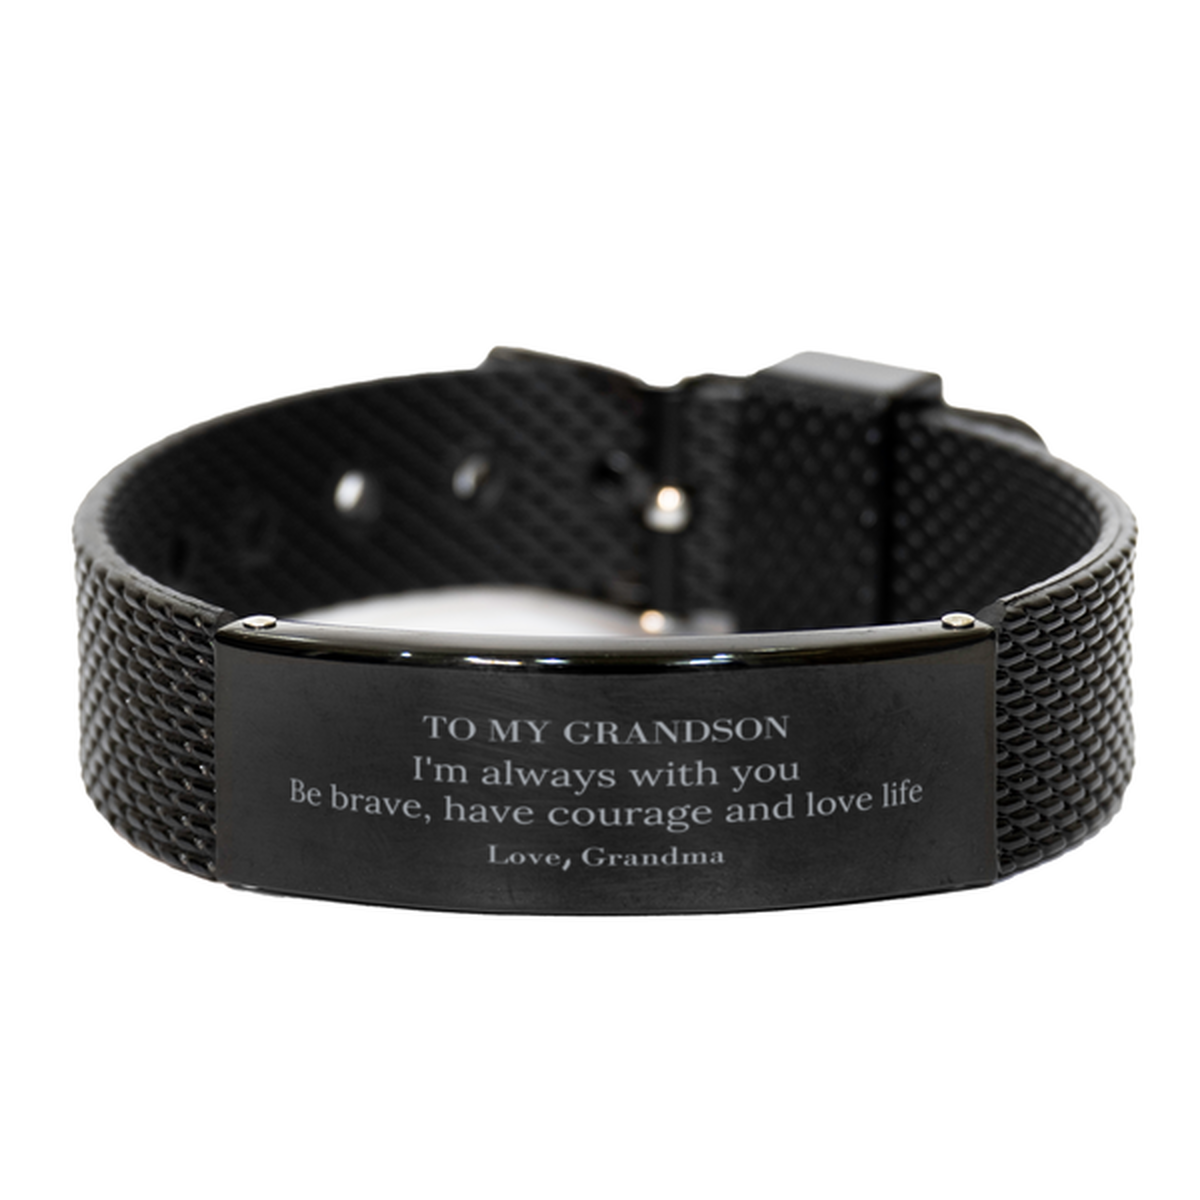 To My Grandson Gifts from Grandma, Unique Black Shark Mesh Bracelet Inspirational Christmas Birthday Graduation Gifts for Grandson I'm always with you. Be brave, have courage and love life. Love, Grandma